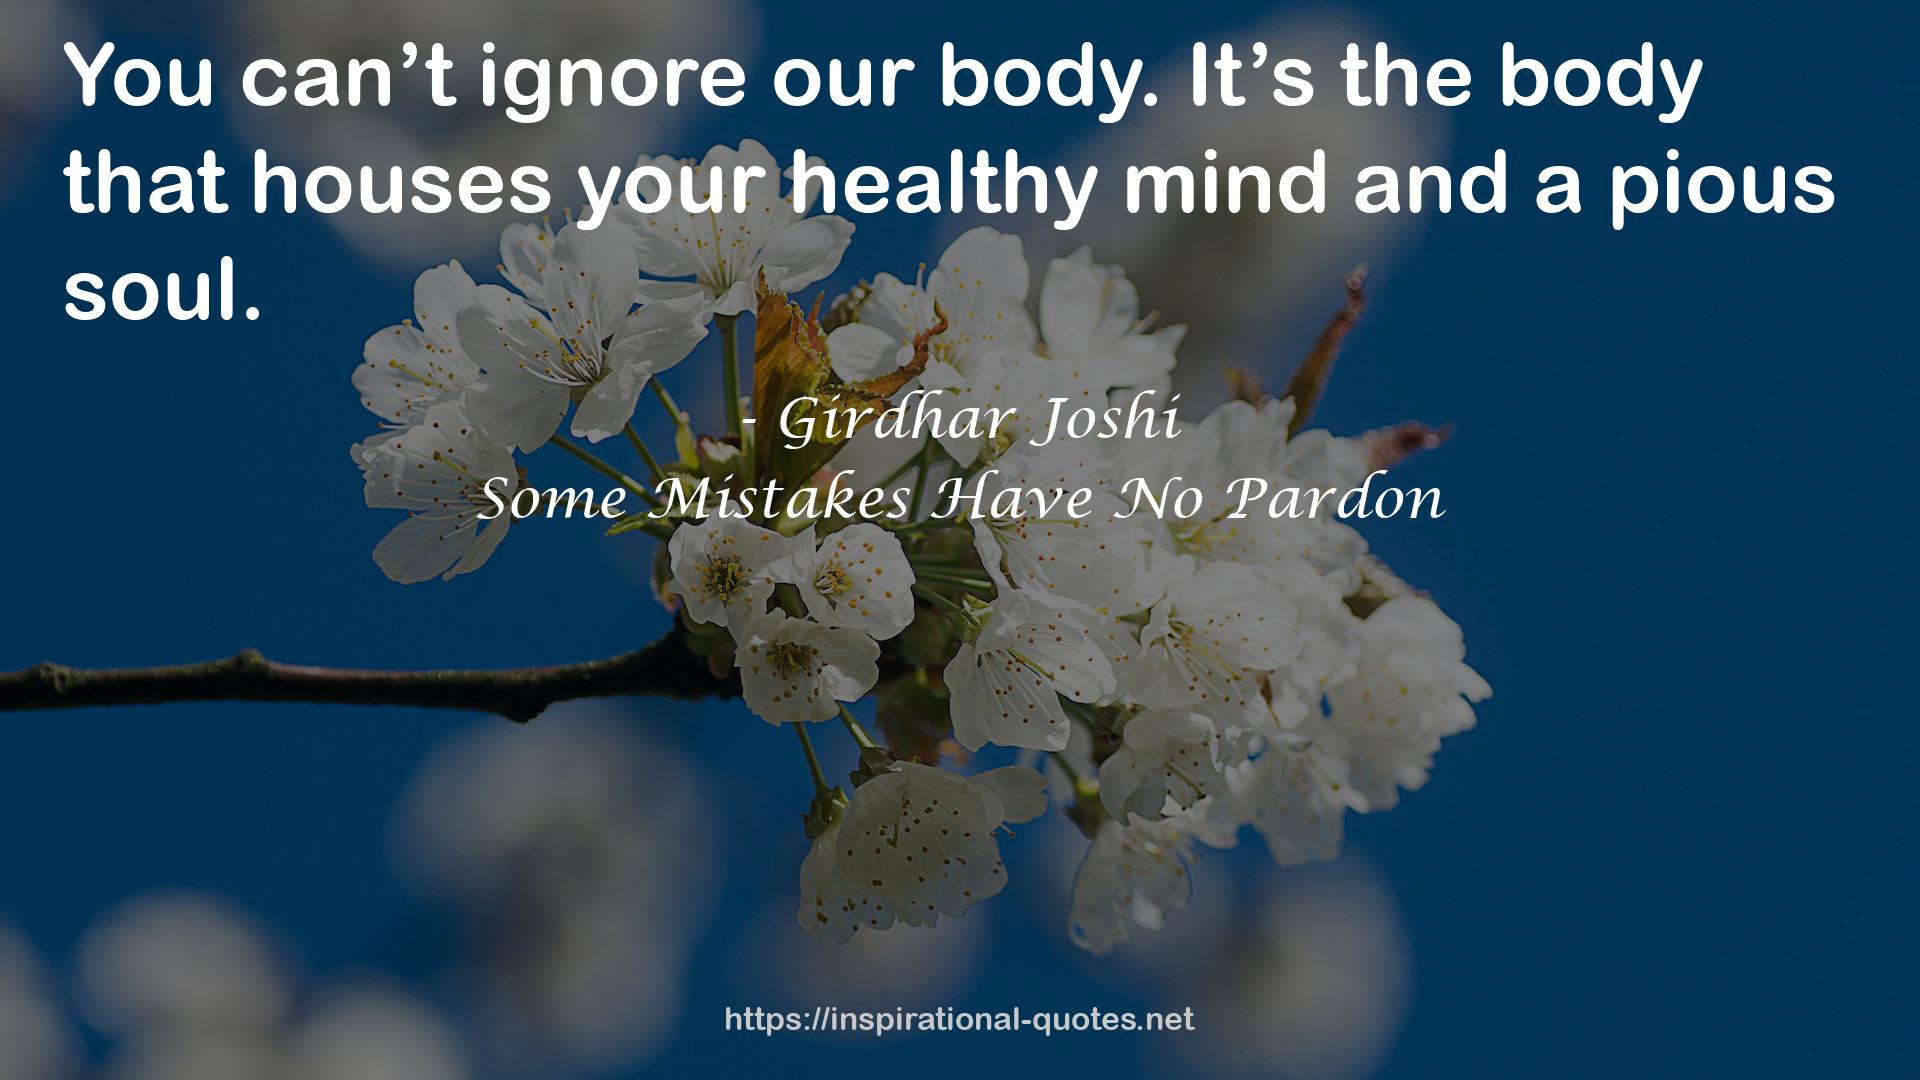 your healthy mind  QUOTES